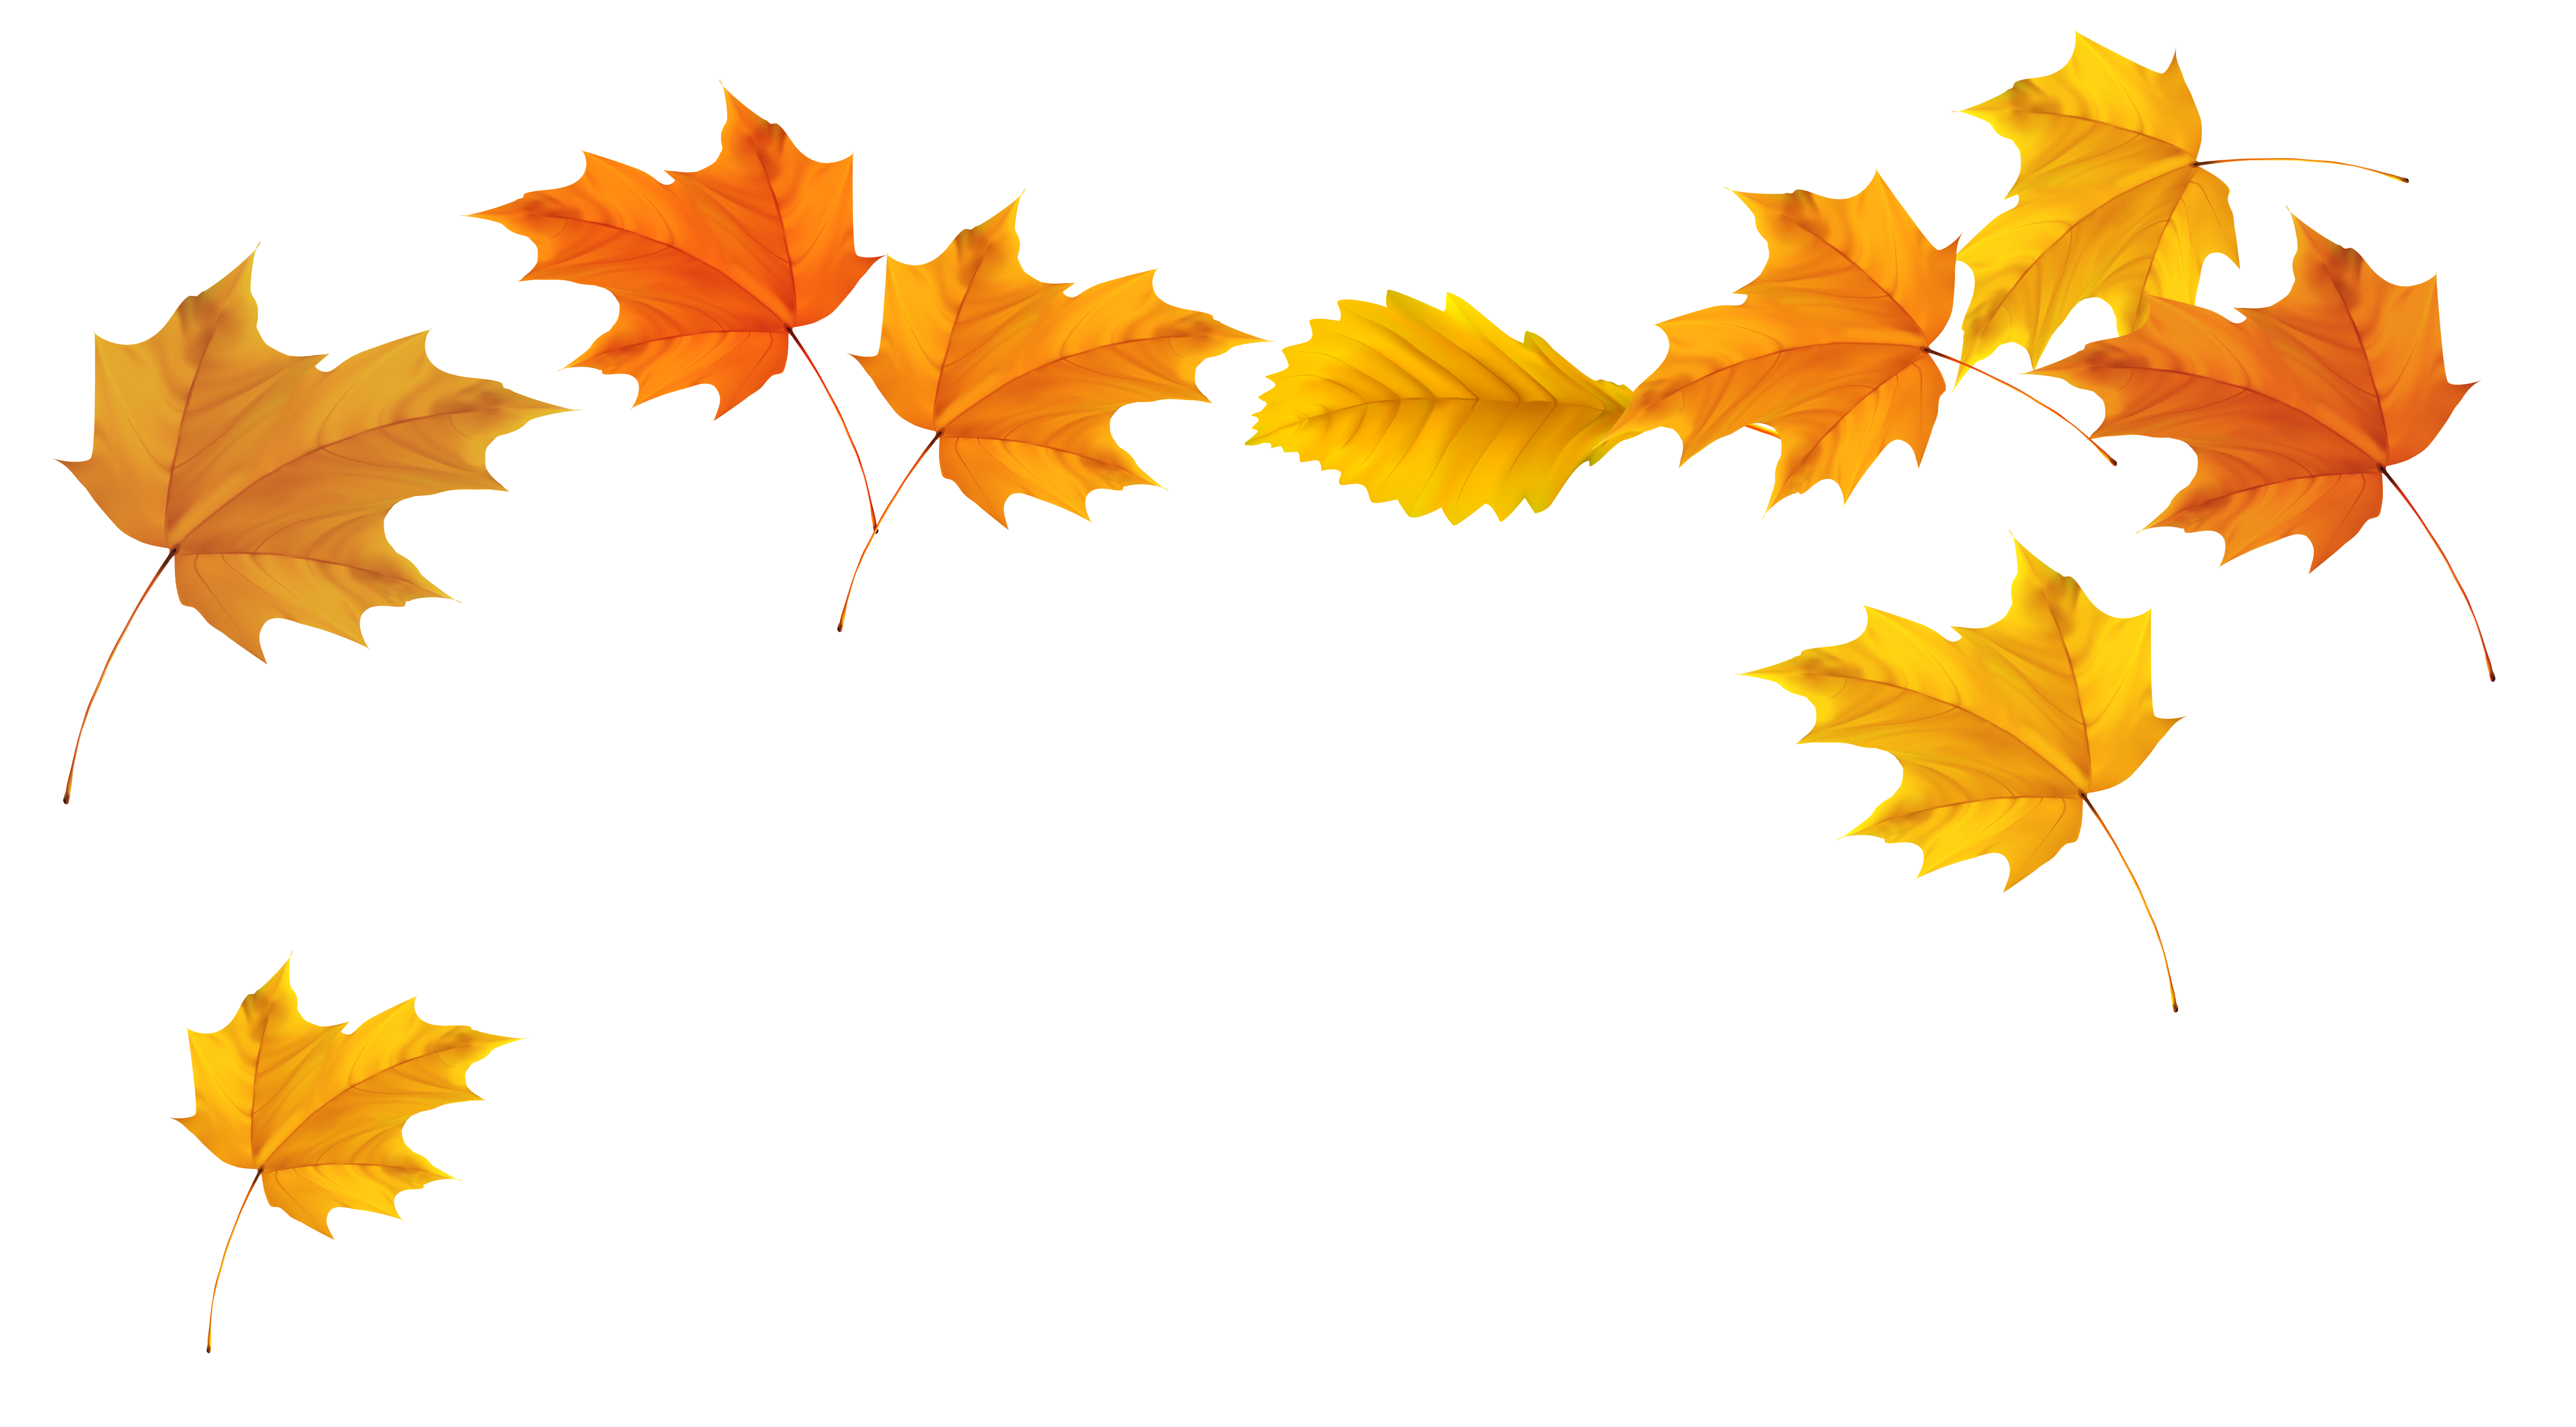 Leaves blowing in the wind clipart